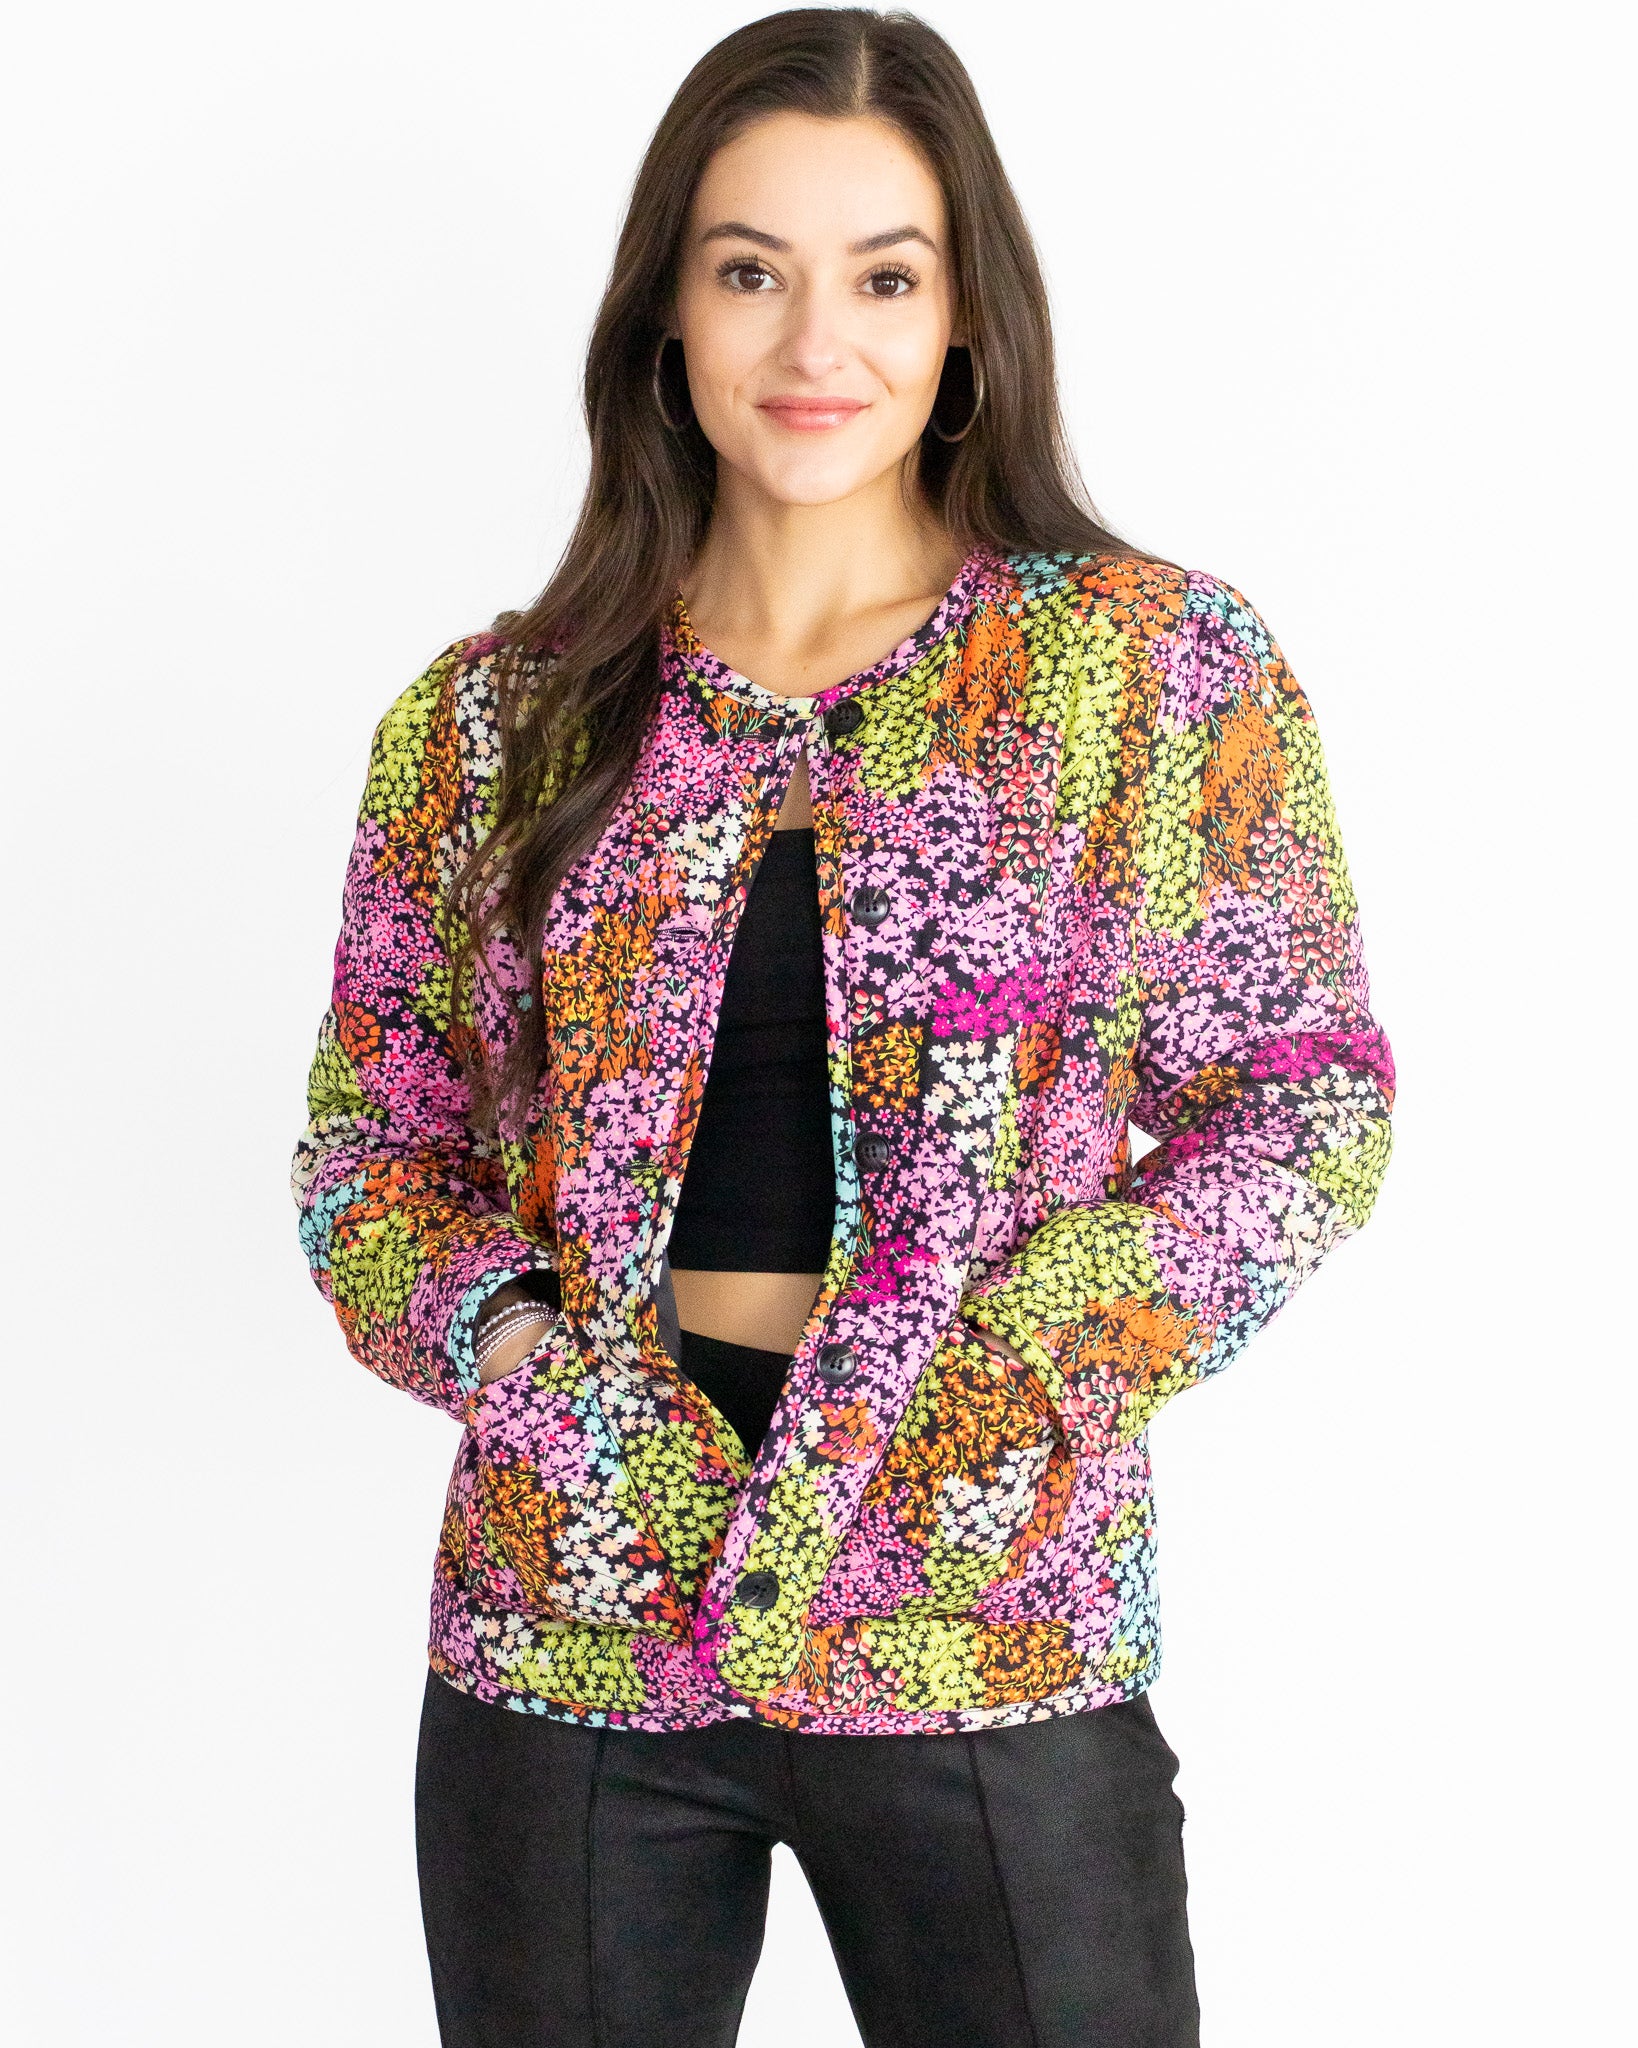 Fields of Flowers Quilted Bomber